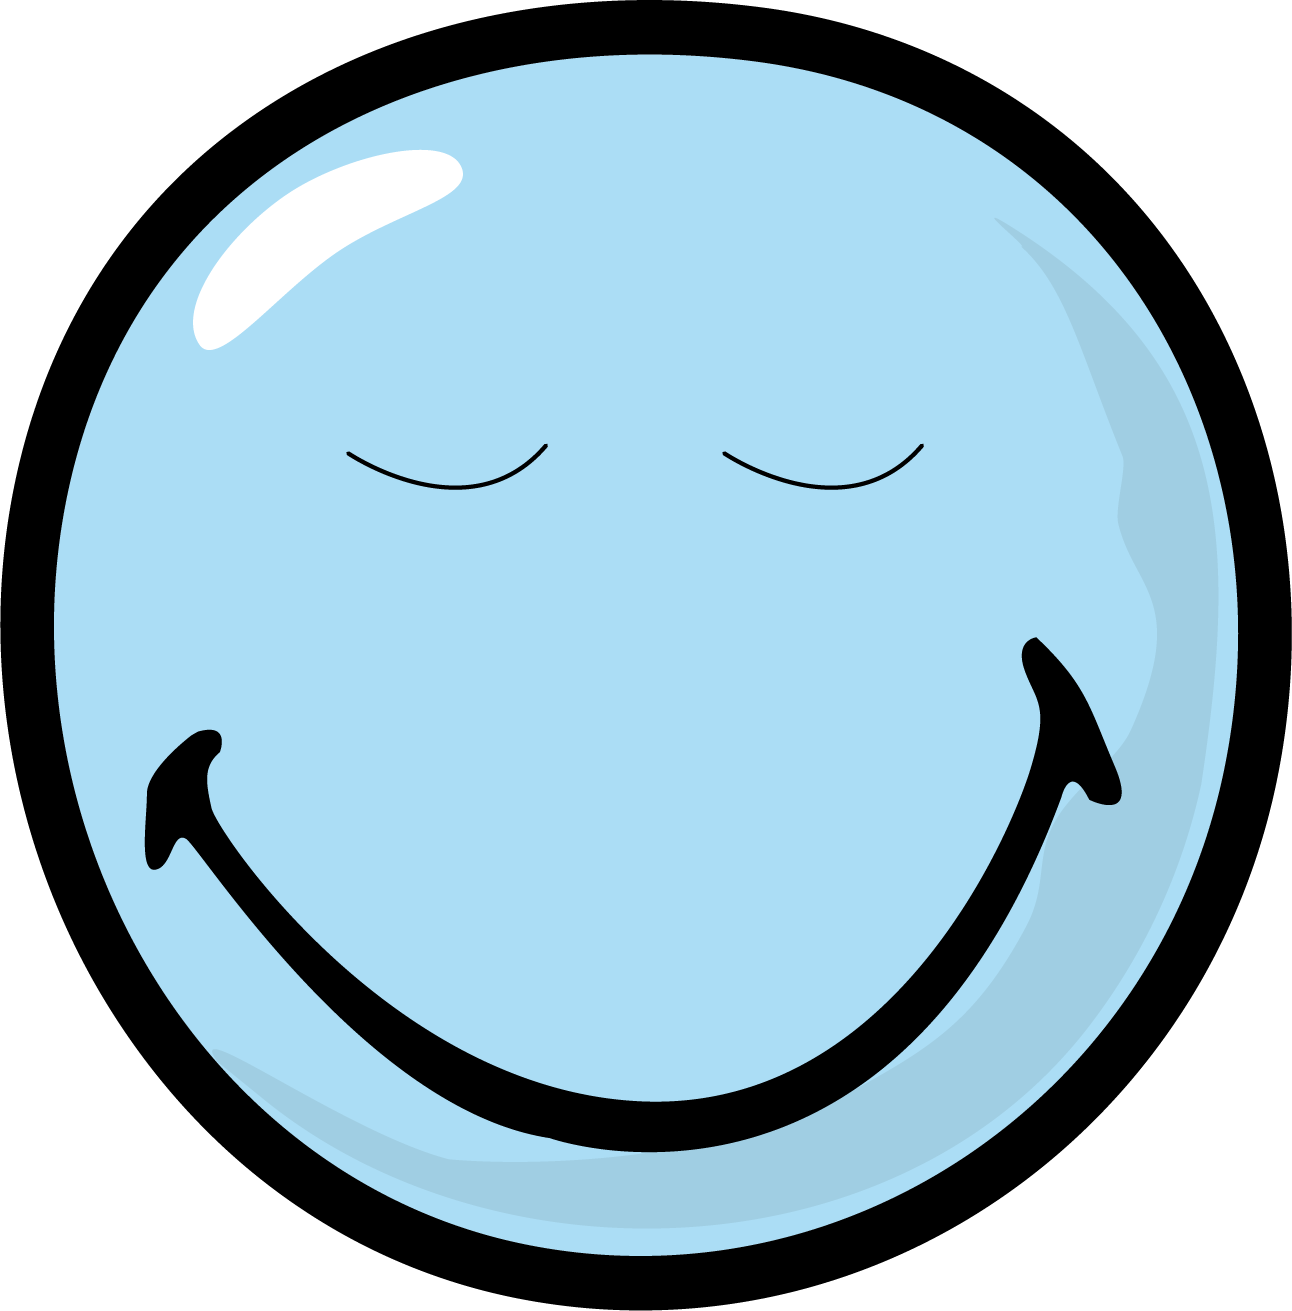 Listen Face Smiley Clipart - Smiley Tribes| 16x20 Mini Poster (1292x1311)